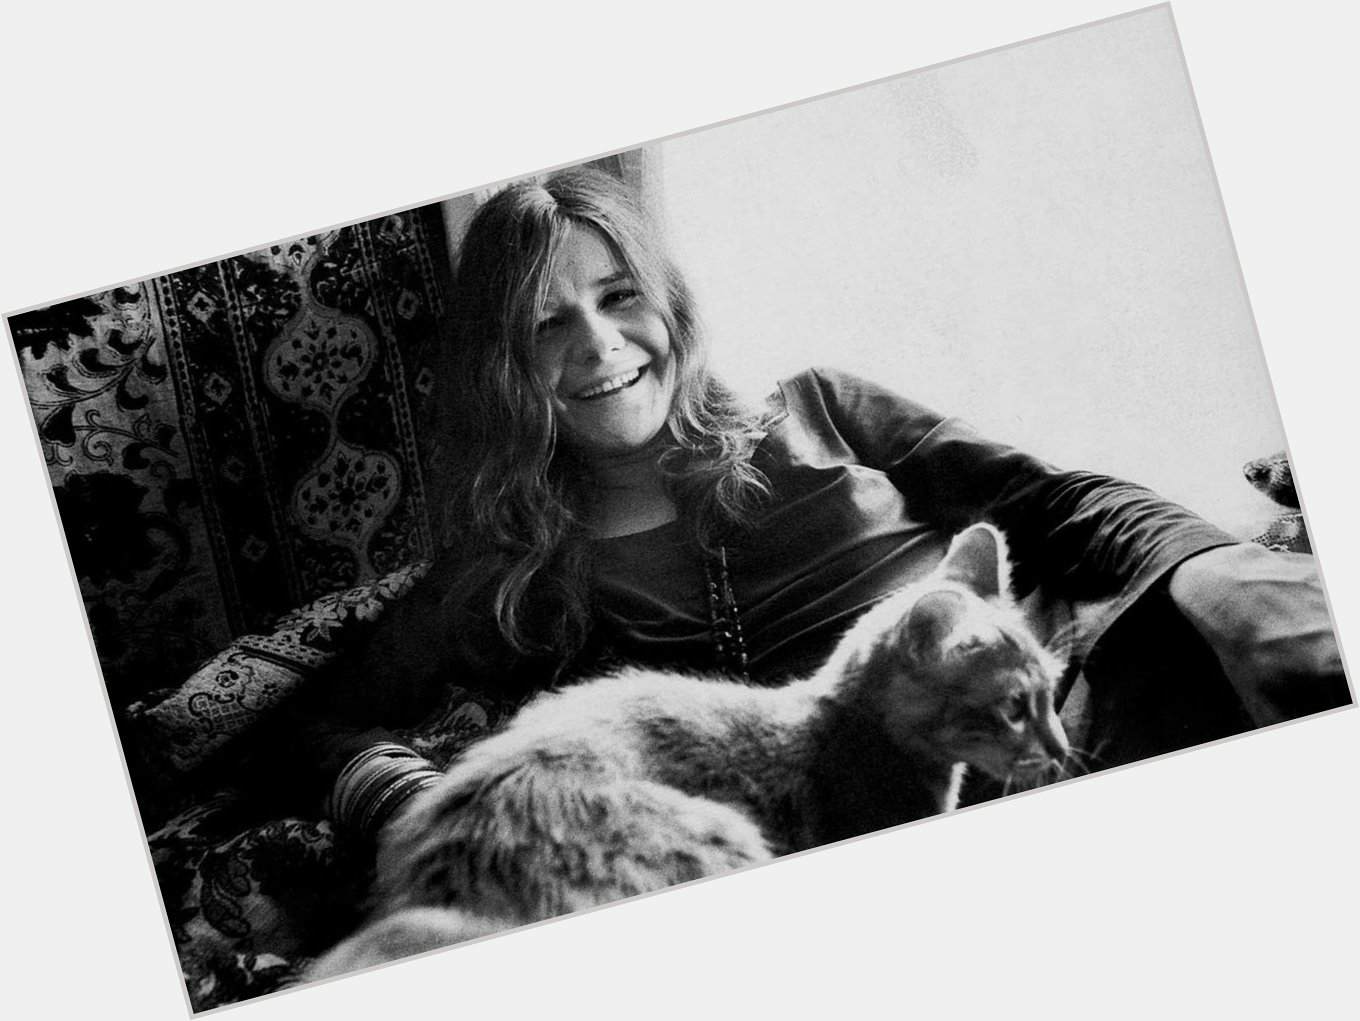 Happy Birthday, Janis Joplin! You always will be in our hearts!
19.01.1943 - 4.10.1970  